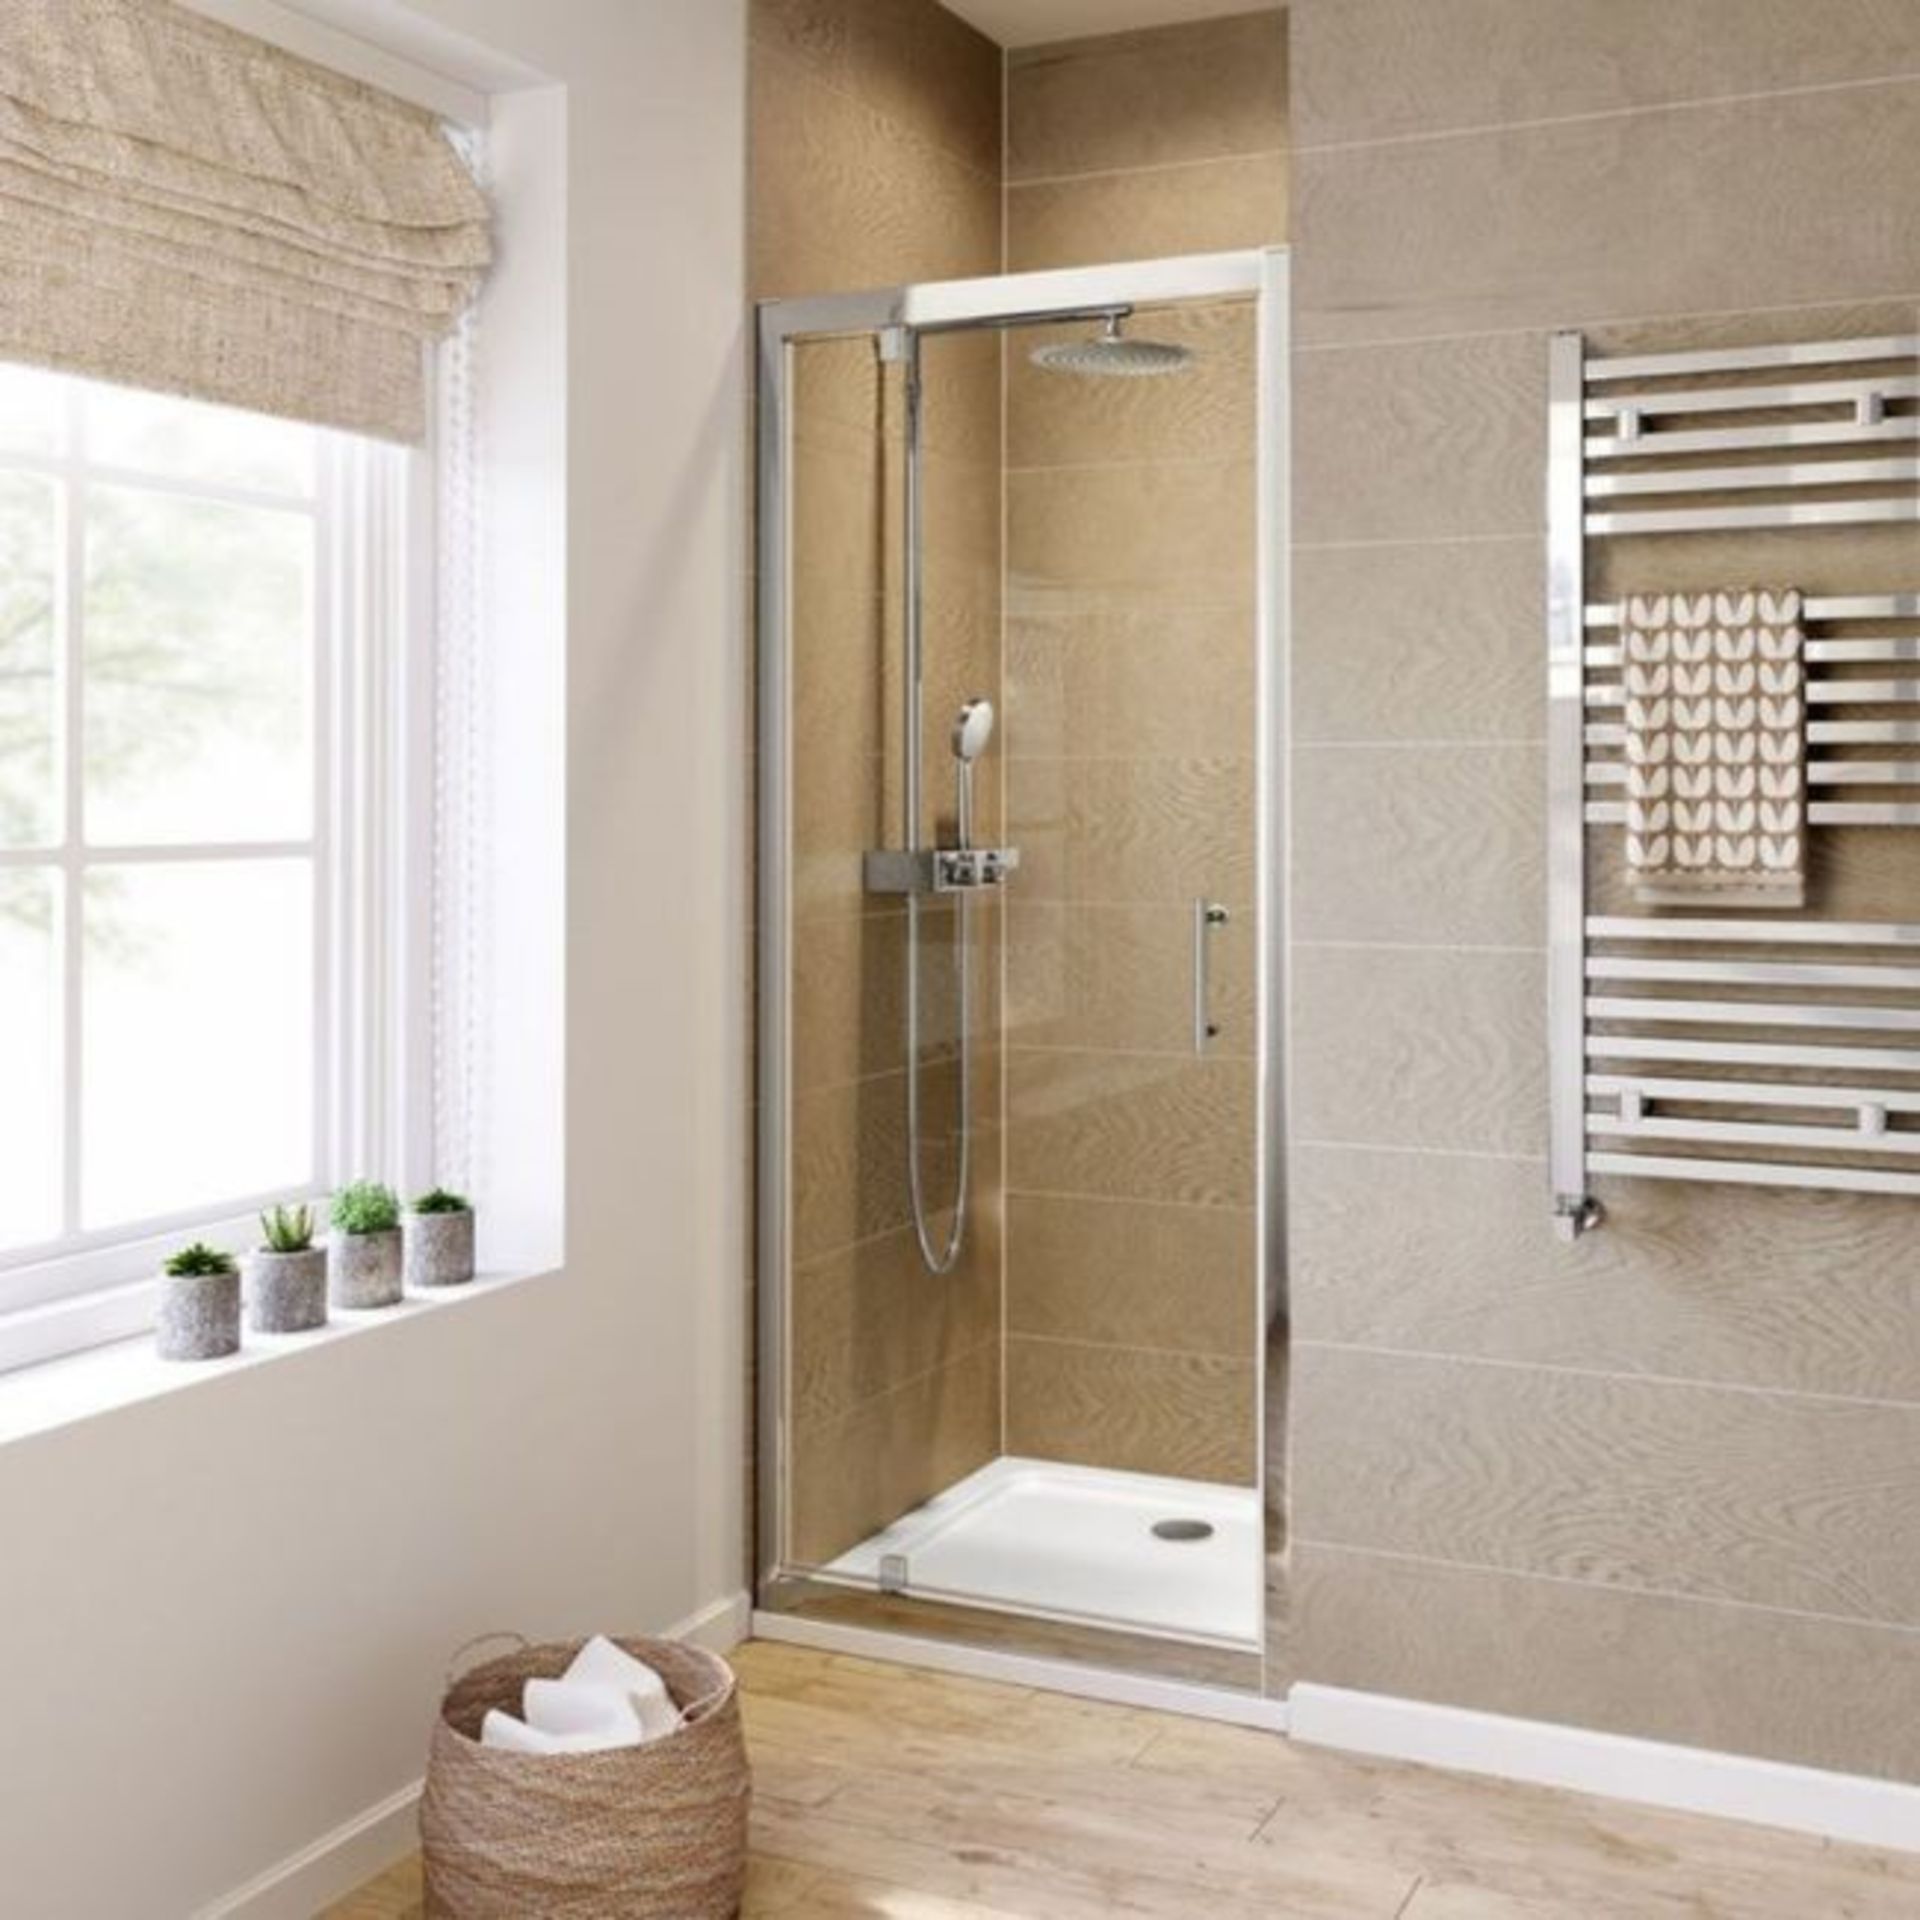 New & Boxed Twyfords 700mm - 6mm - Premium Pivot Shower Door.RRP £299.99.Of2100Cp.8mm Safety Glass